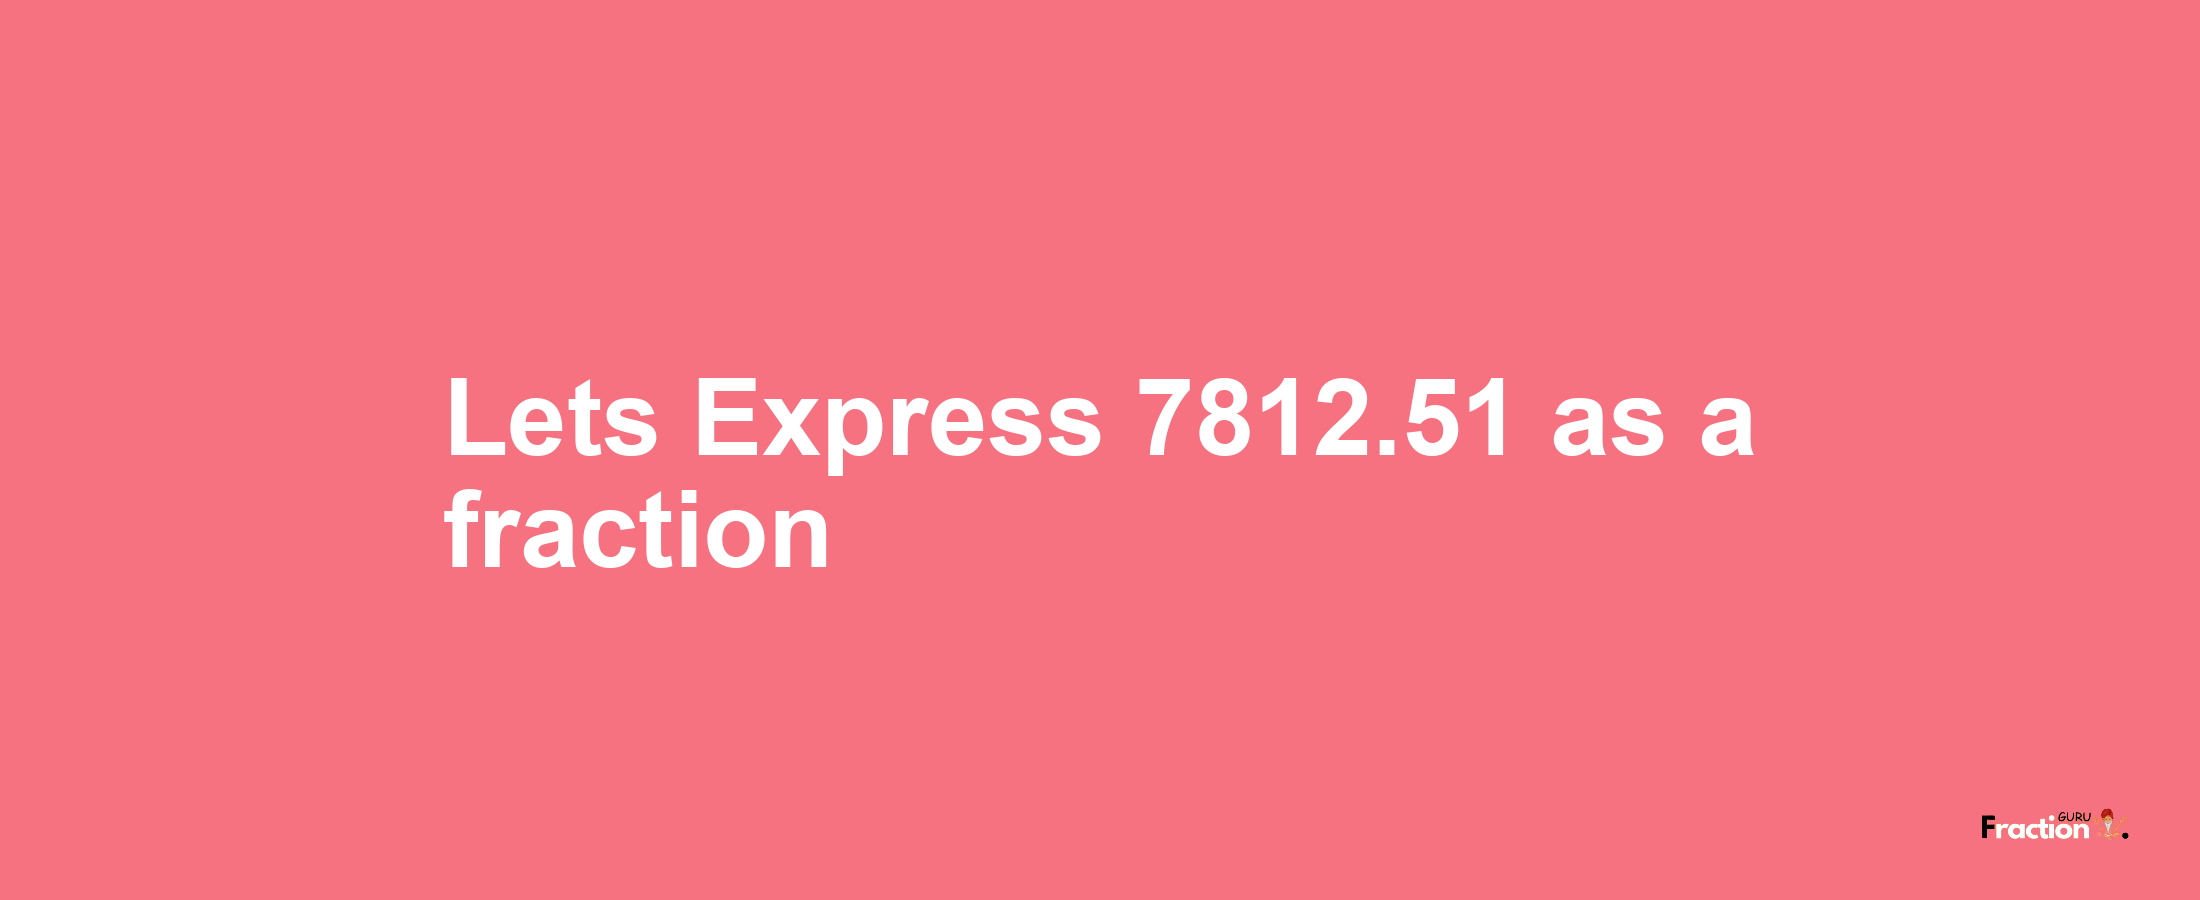 Lets Express 7812.51 as afraction